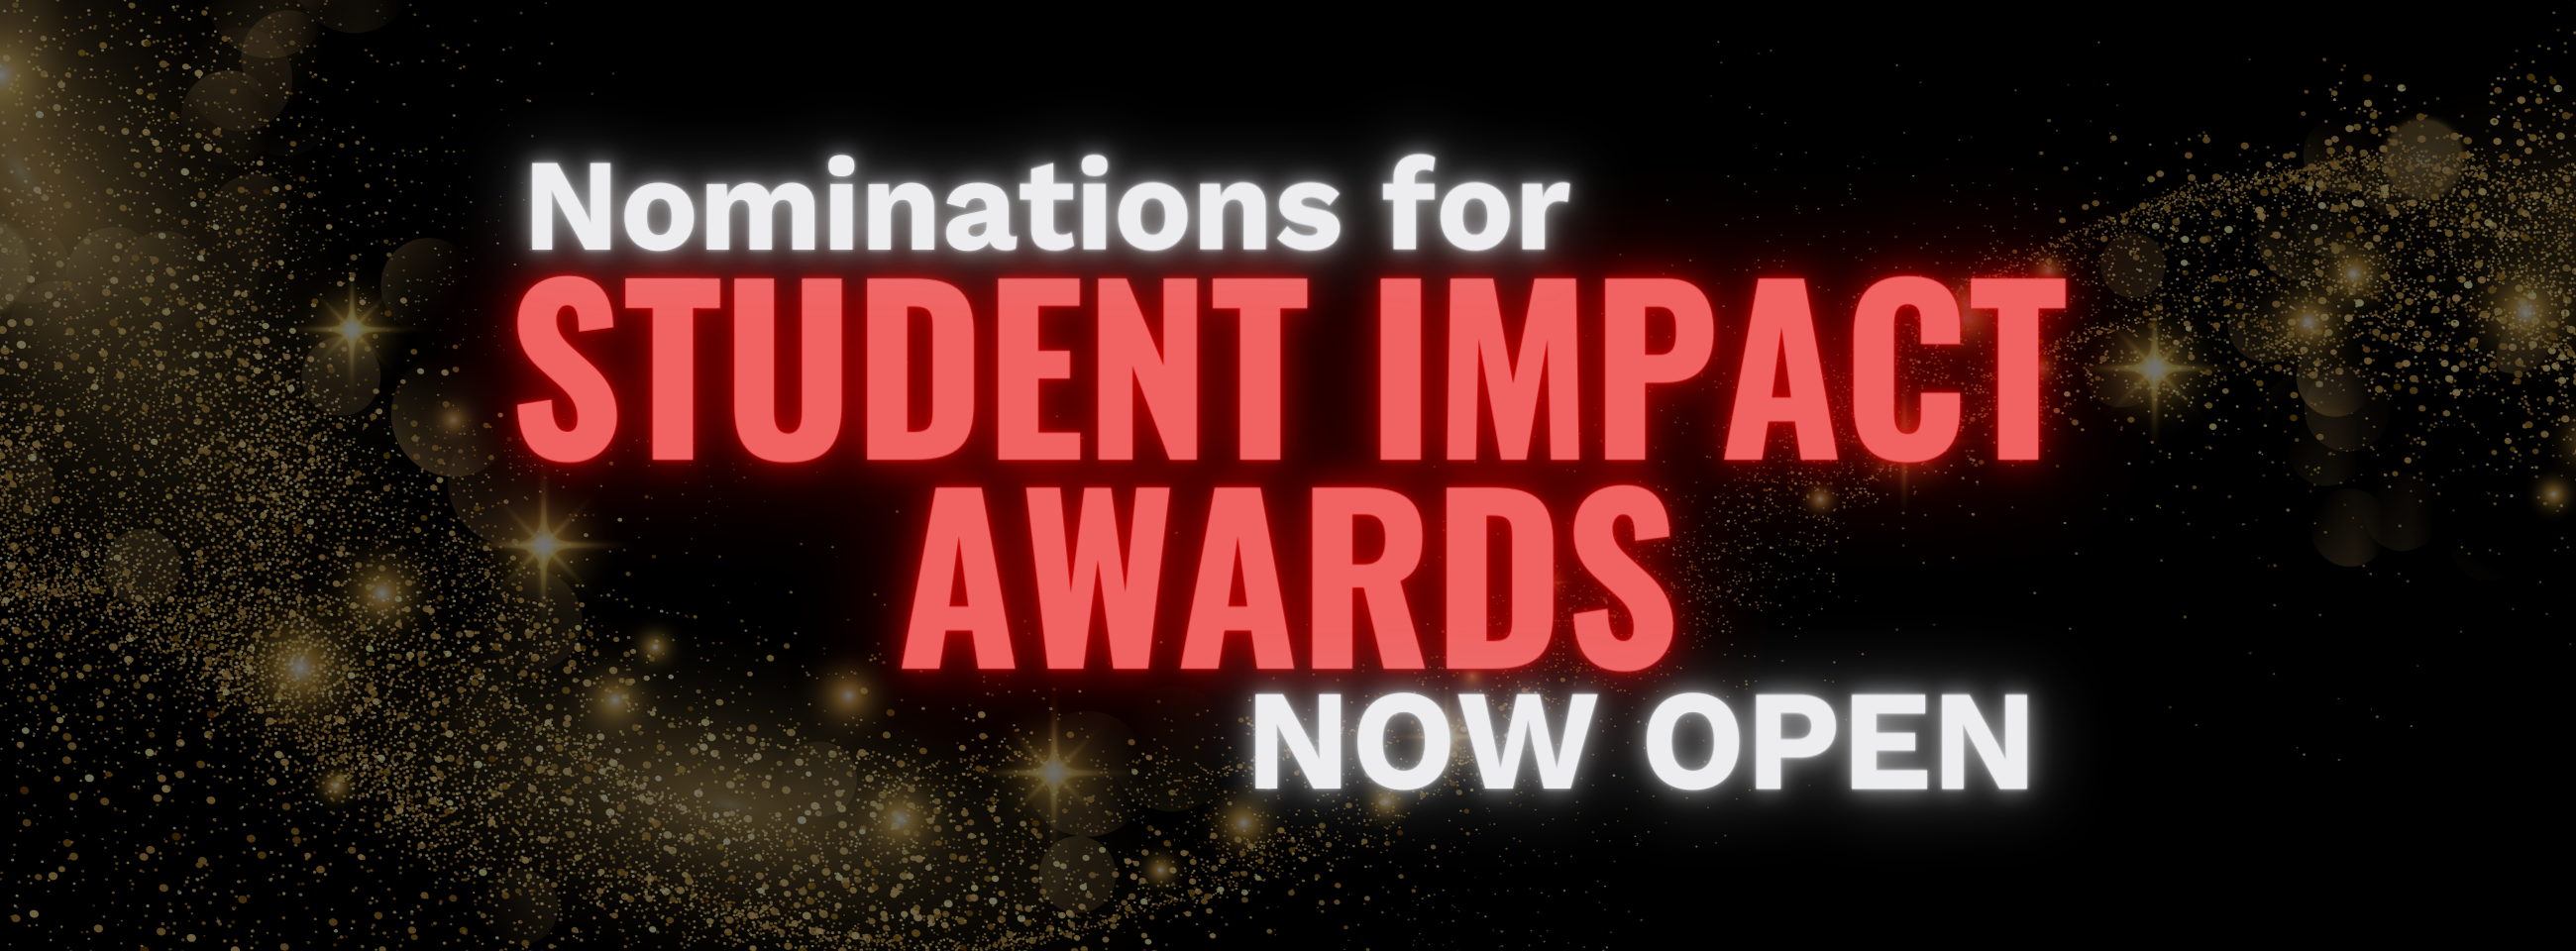 Student Impact Award Nominations are now open!